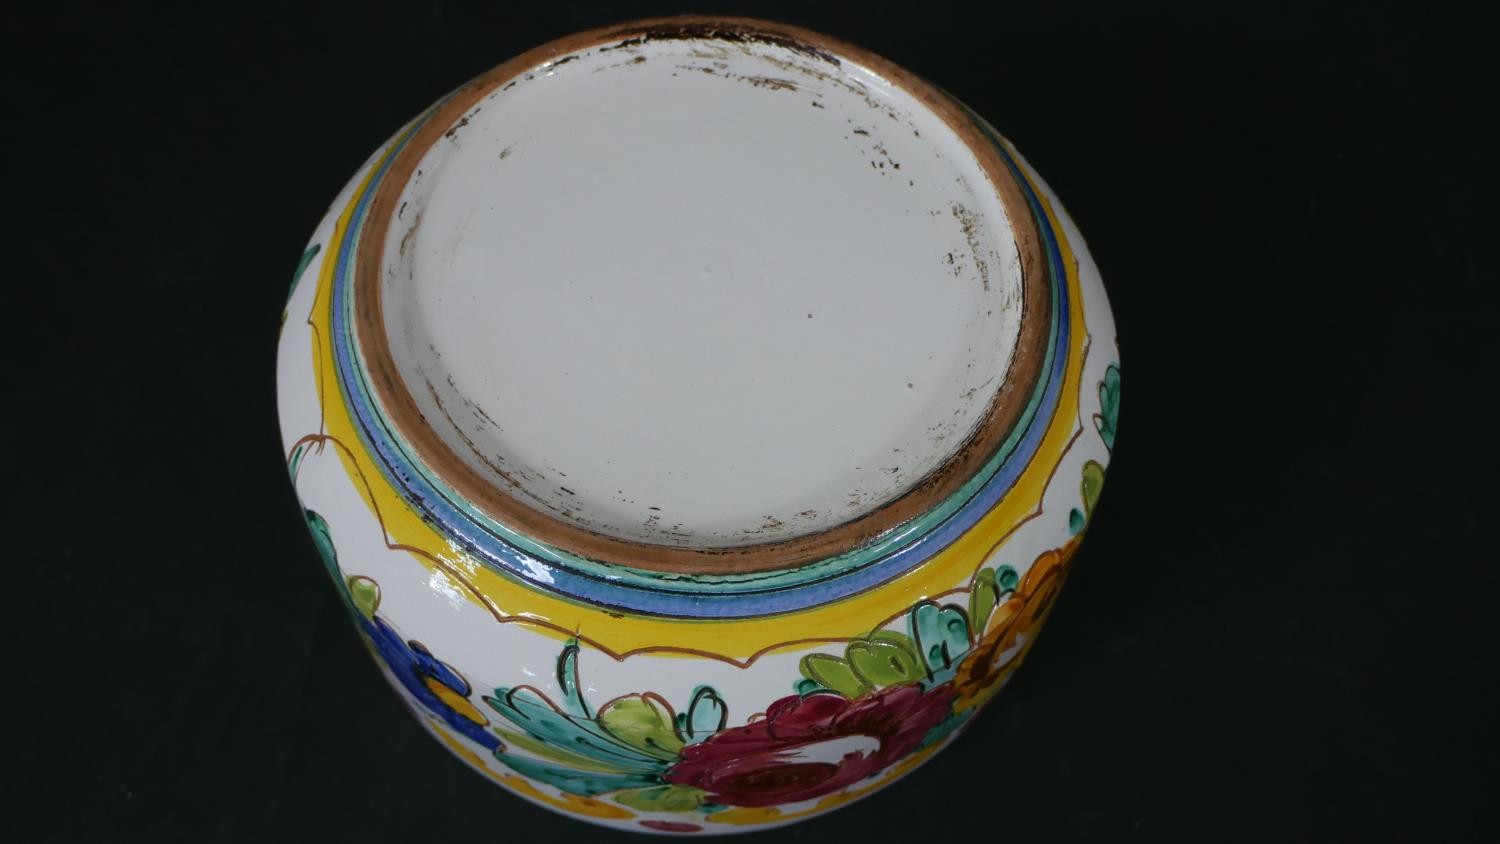 A large Portuguese hand painted ceramic rooster bowl along with a Majolica floral design bowl. D. - Image 6 of 6